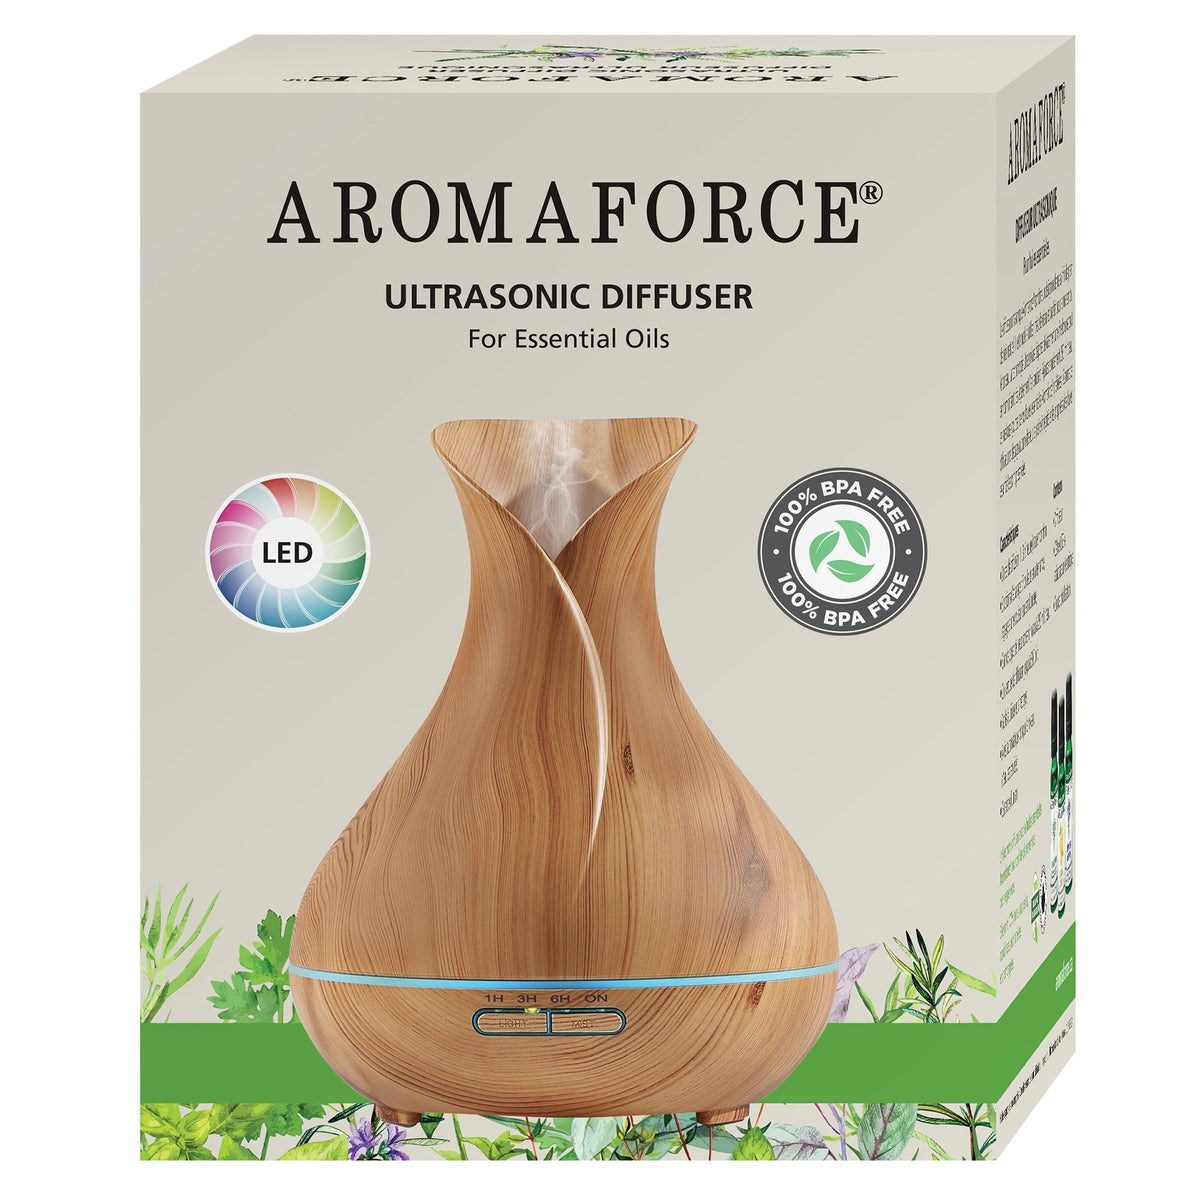 Aromaforce Ultrasonic Diffuser - large - A.Vogel Canada